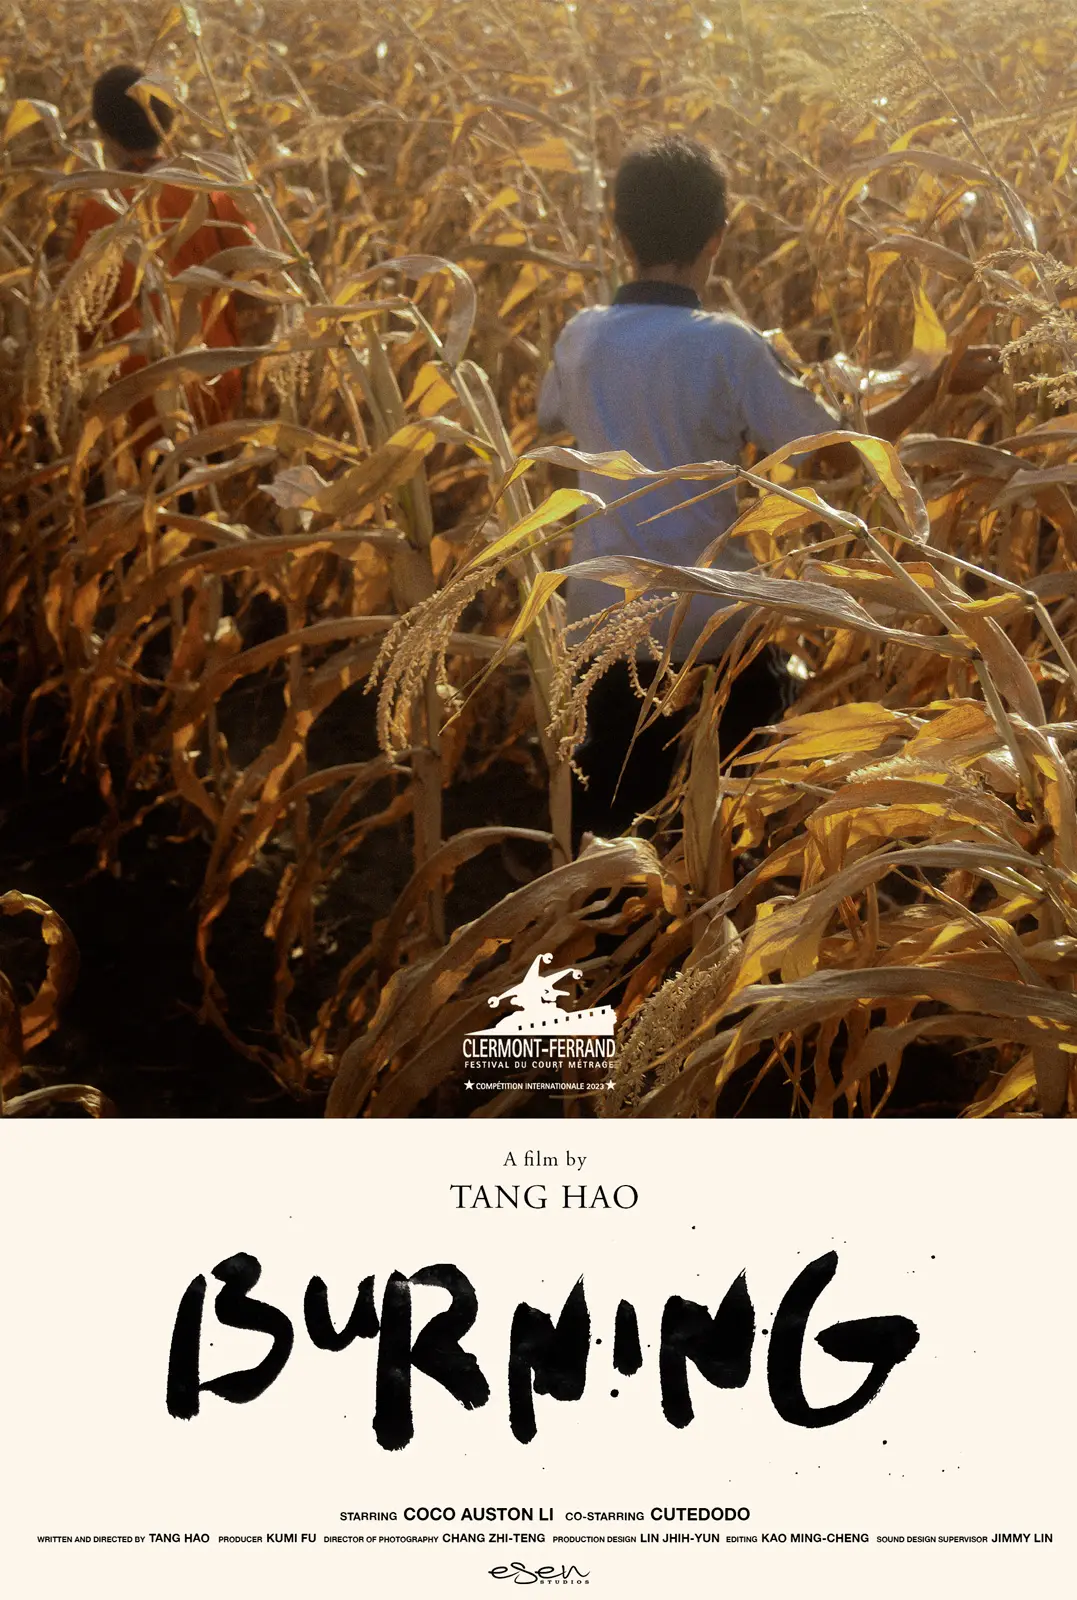 Poster of the short film: "Burning" by Tang Hao